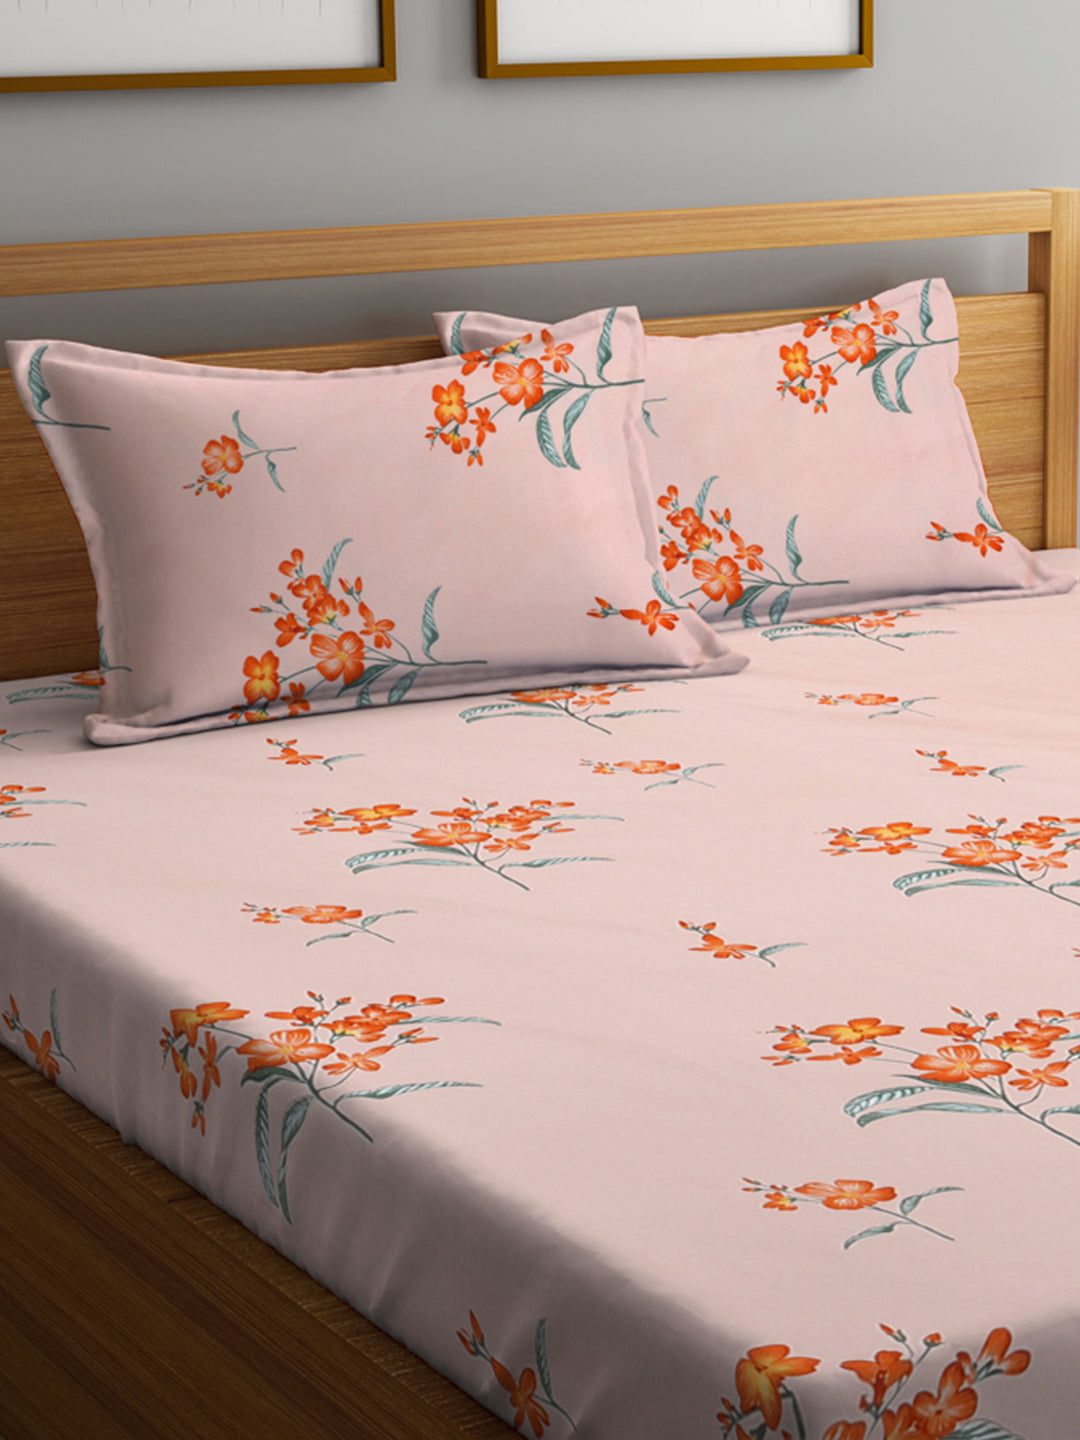 Klotthe Multi Floral 300 TC Cotton Blend Double Bed Sheet with 2 Pillow Covers in Book Fold Packing